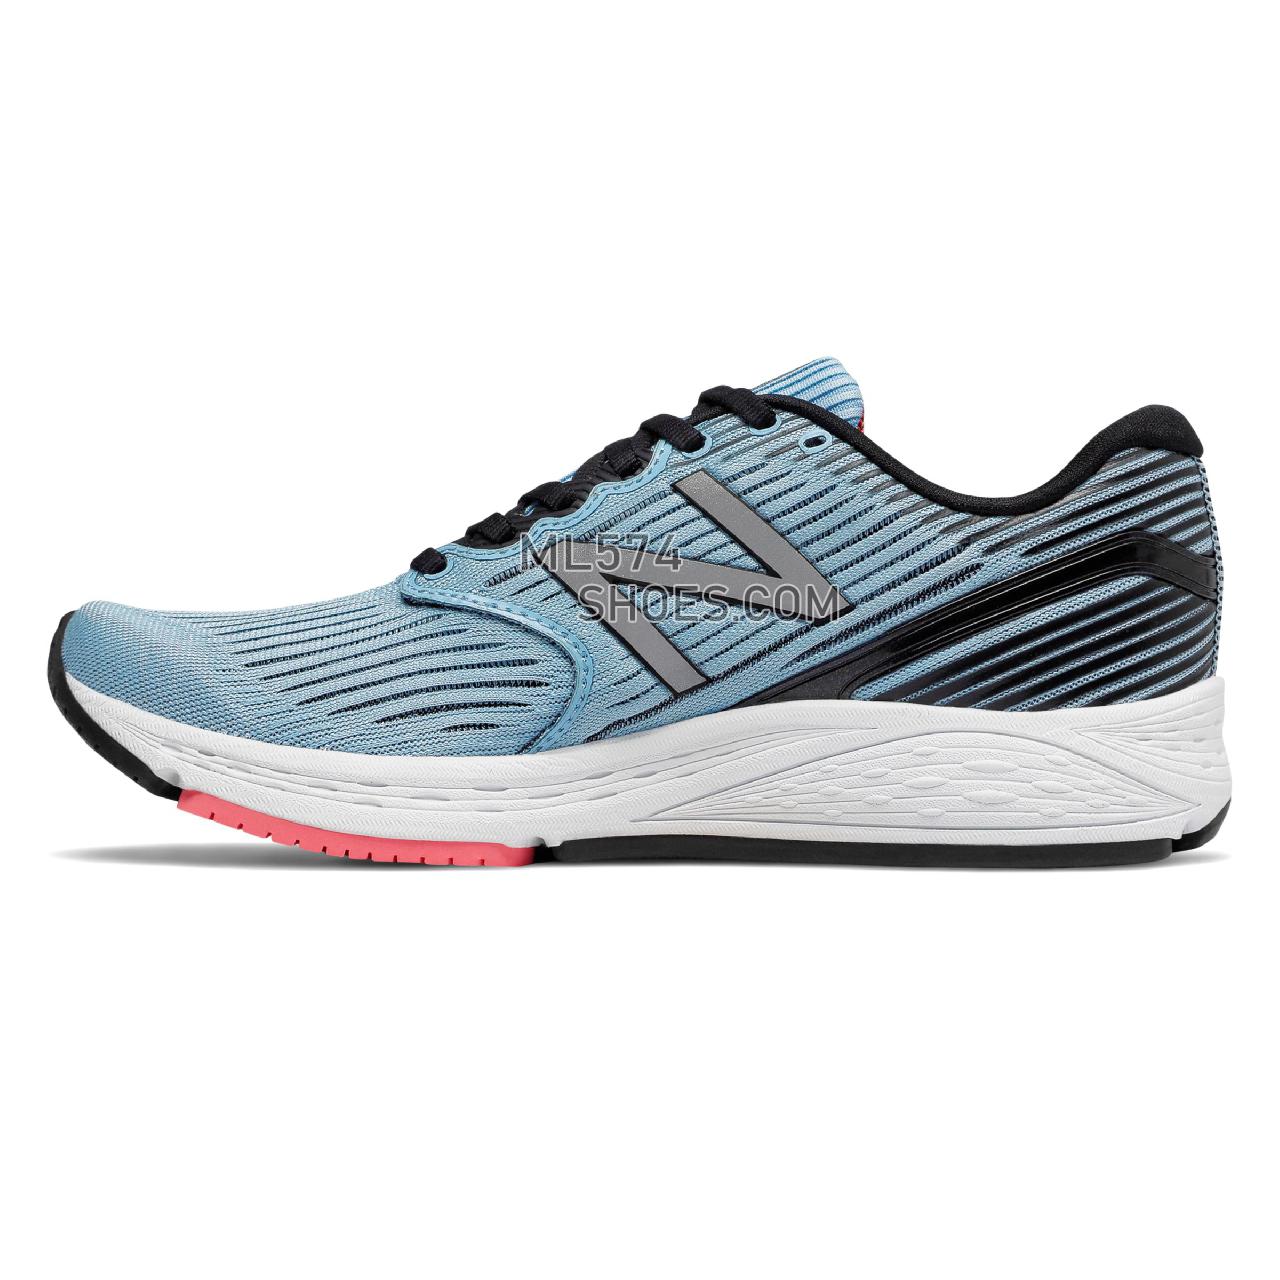 New Balance 890v6 - Women's 890 - Running Clear Sky with Coral and Black - W890LB6